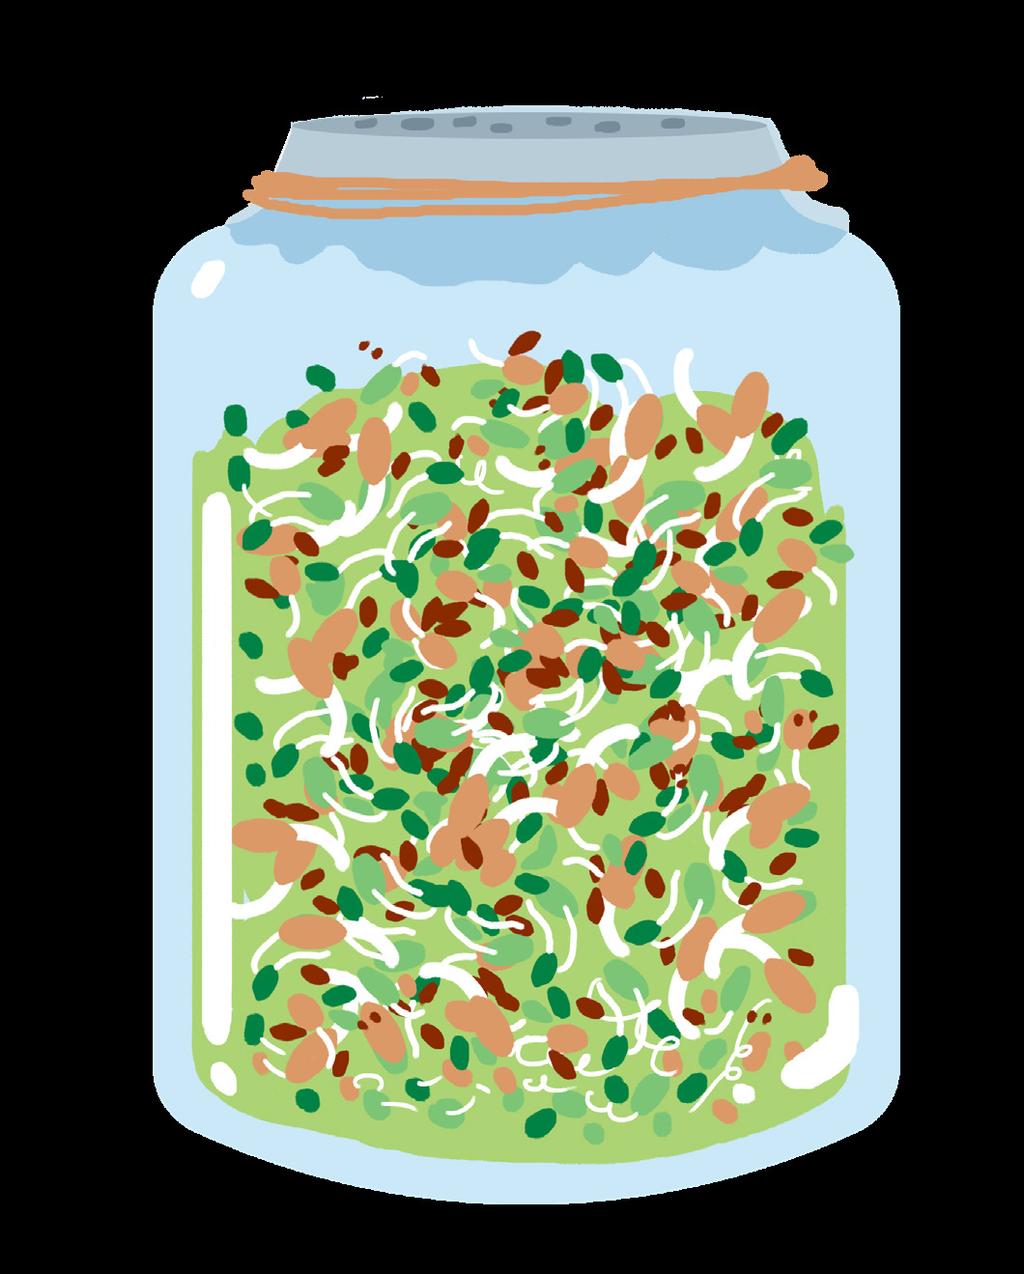 Starting Sprouts Show students the seeds you are going to germinate. Discuss how students have seen sprouts in recipes or in supermarkets.